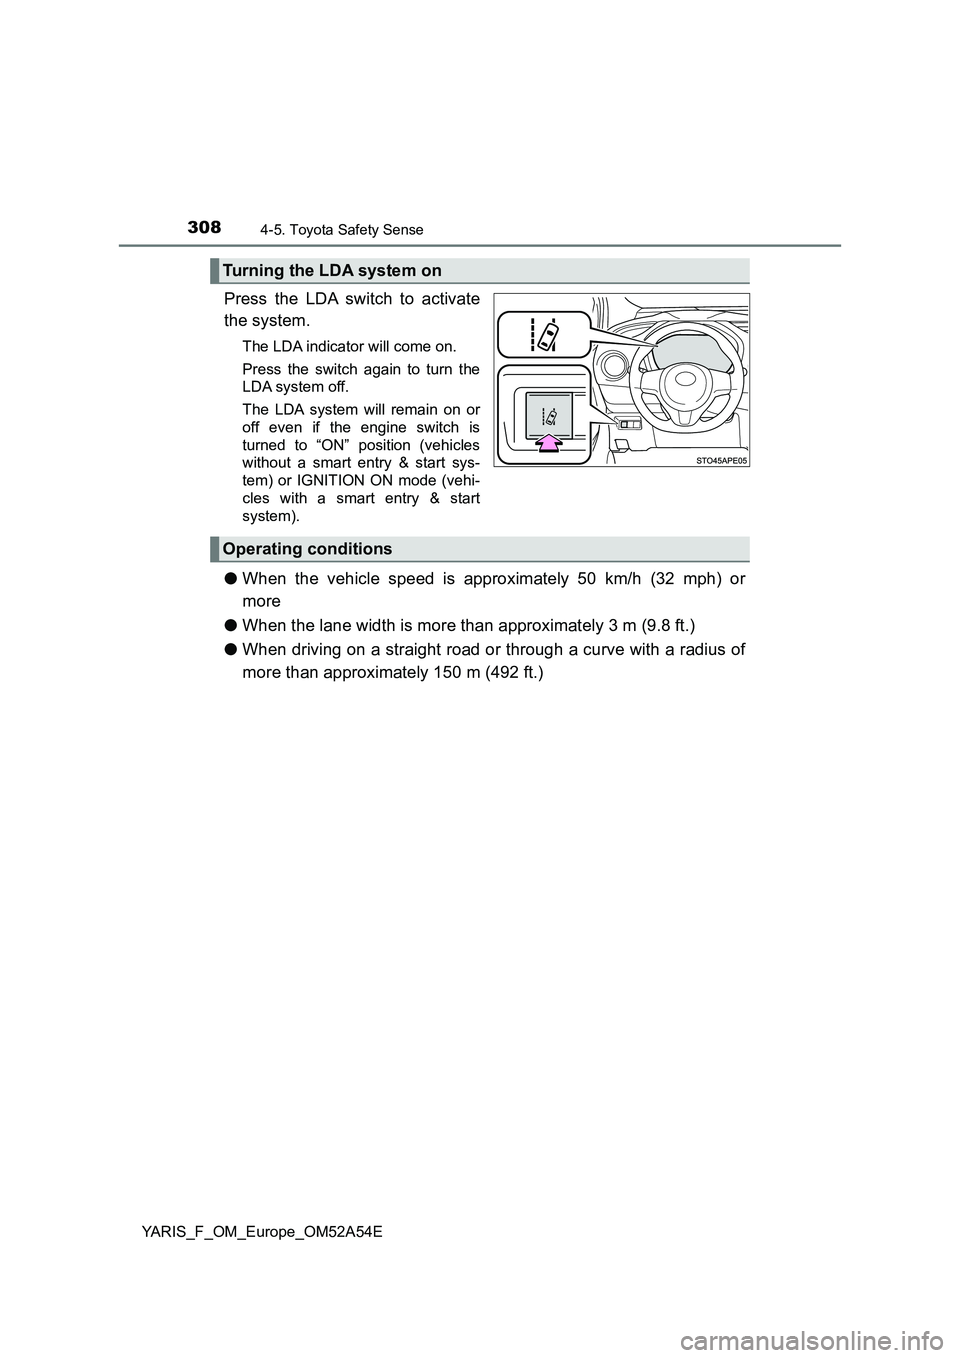 TOYOTA YARIS 2020  Owners Manual 3084-5. Toyota Safety Sense
YARIS_F_OM_Europe_OM52A54E
Press the LDA switch to activate
the system.
The LDA indicator will come on.
Press the switch again to turn the
LDA system off.
The LDA system wi